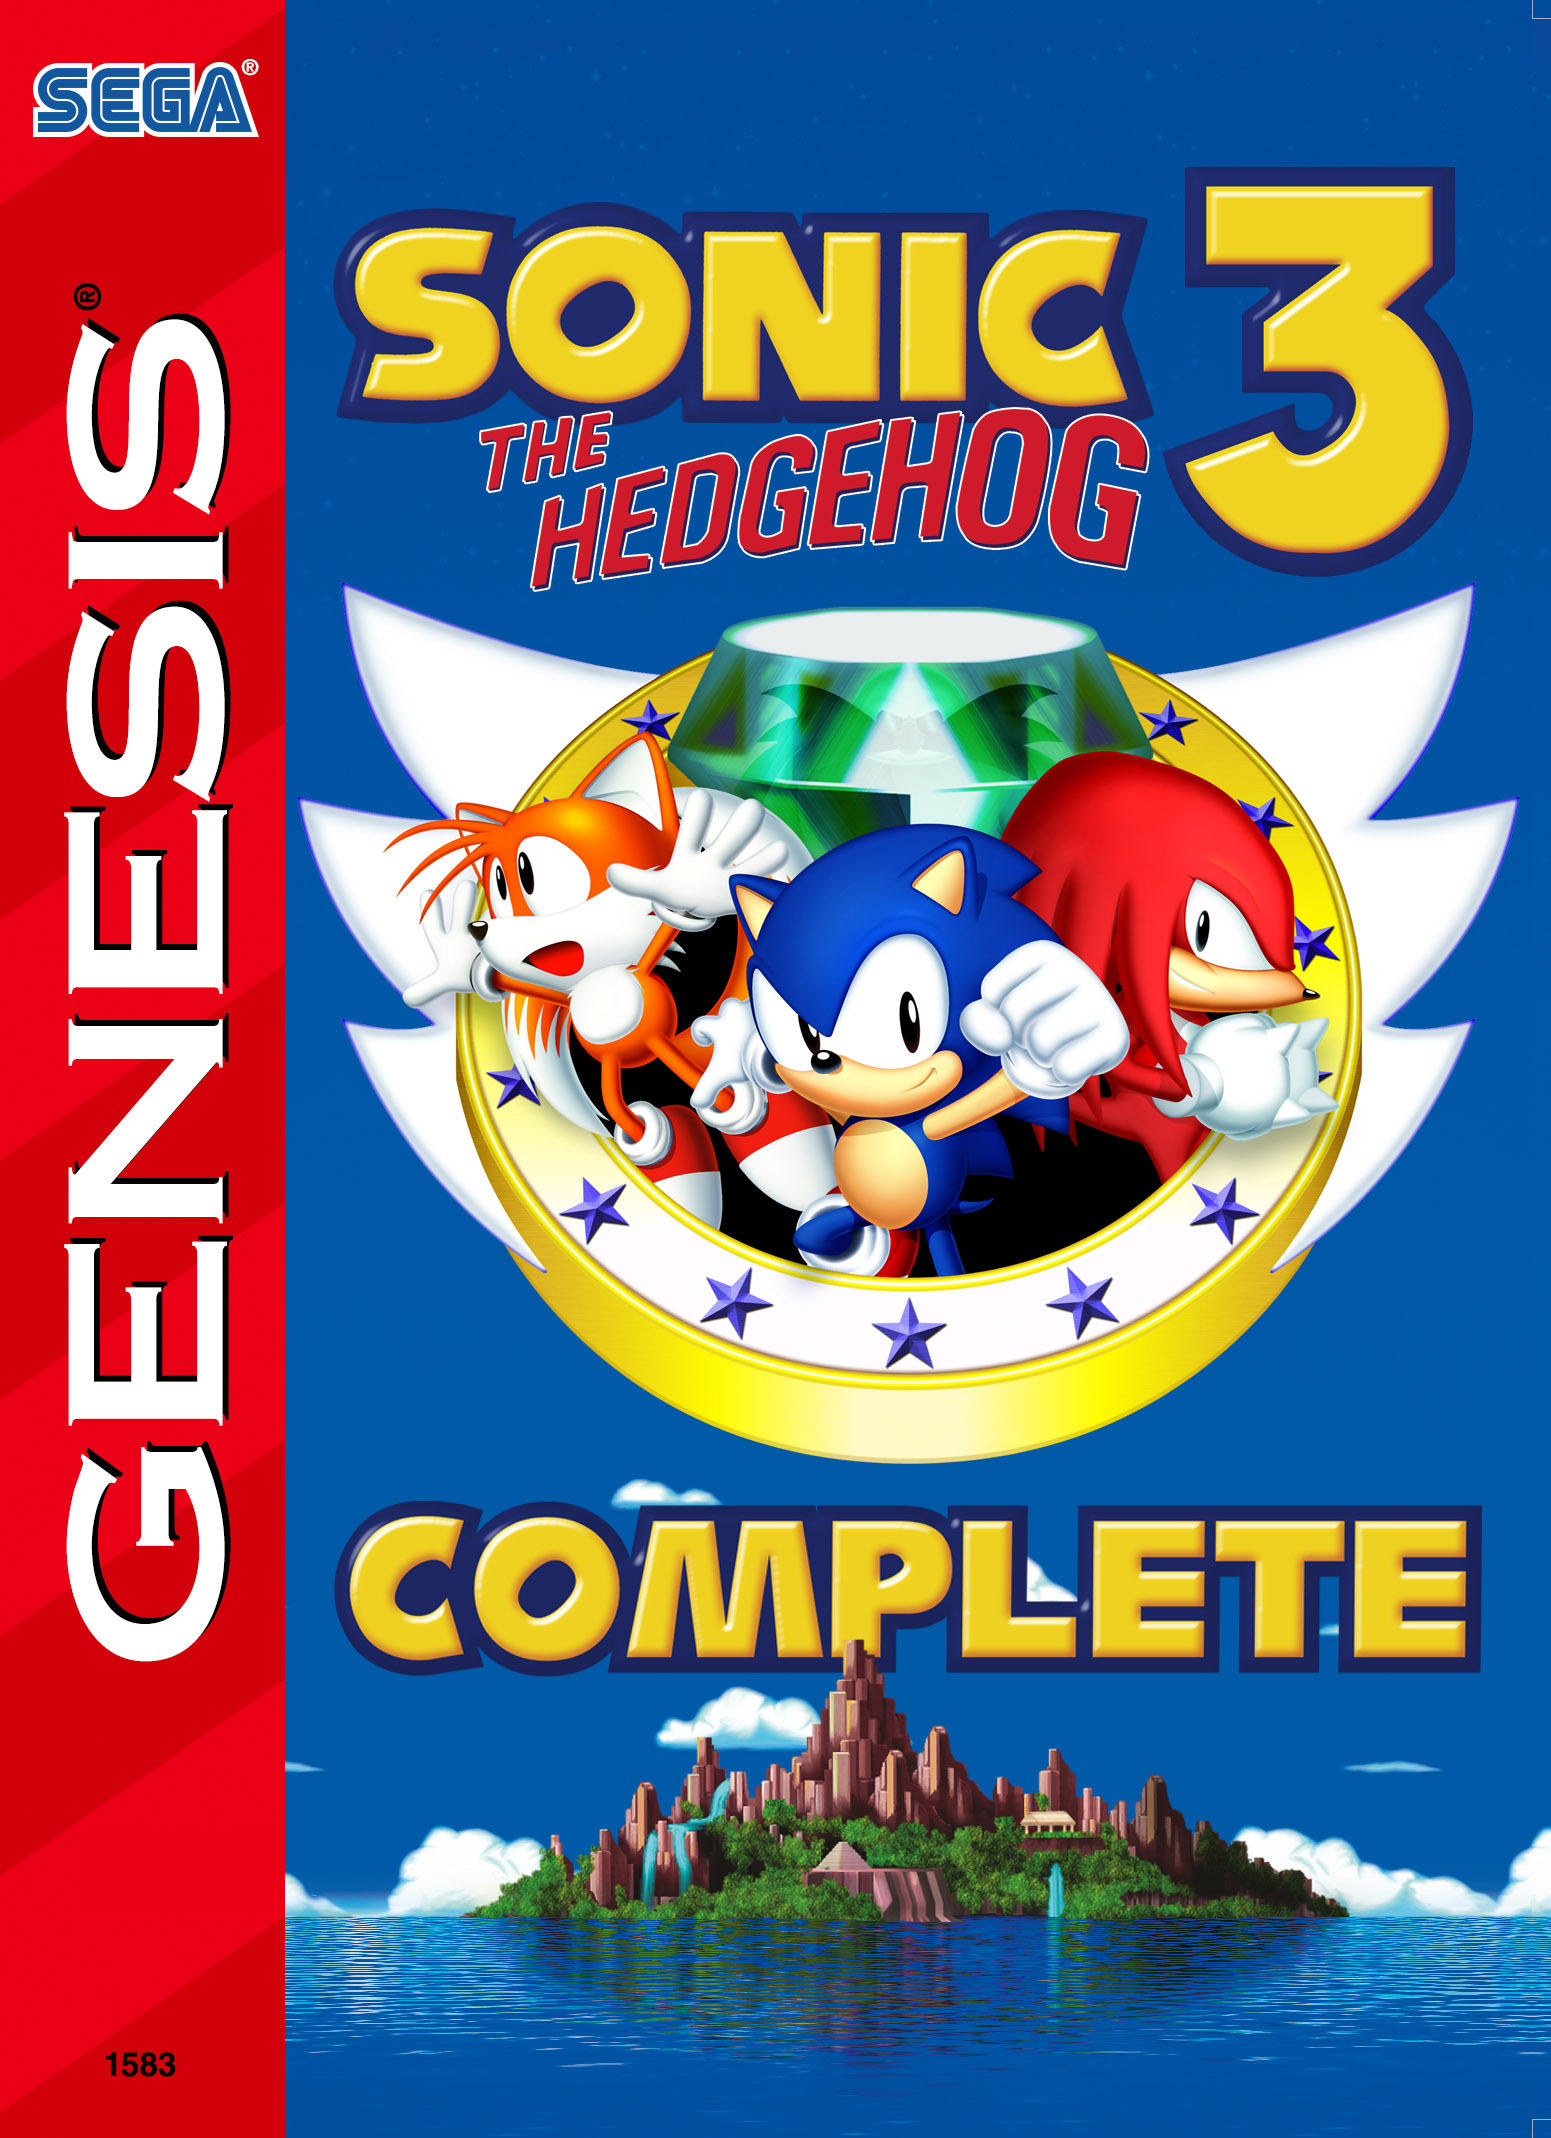 Sonic 3 Complete Details LaunchBox Games Database